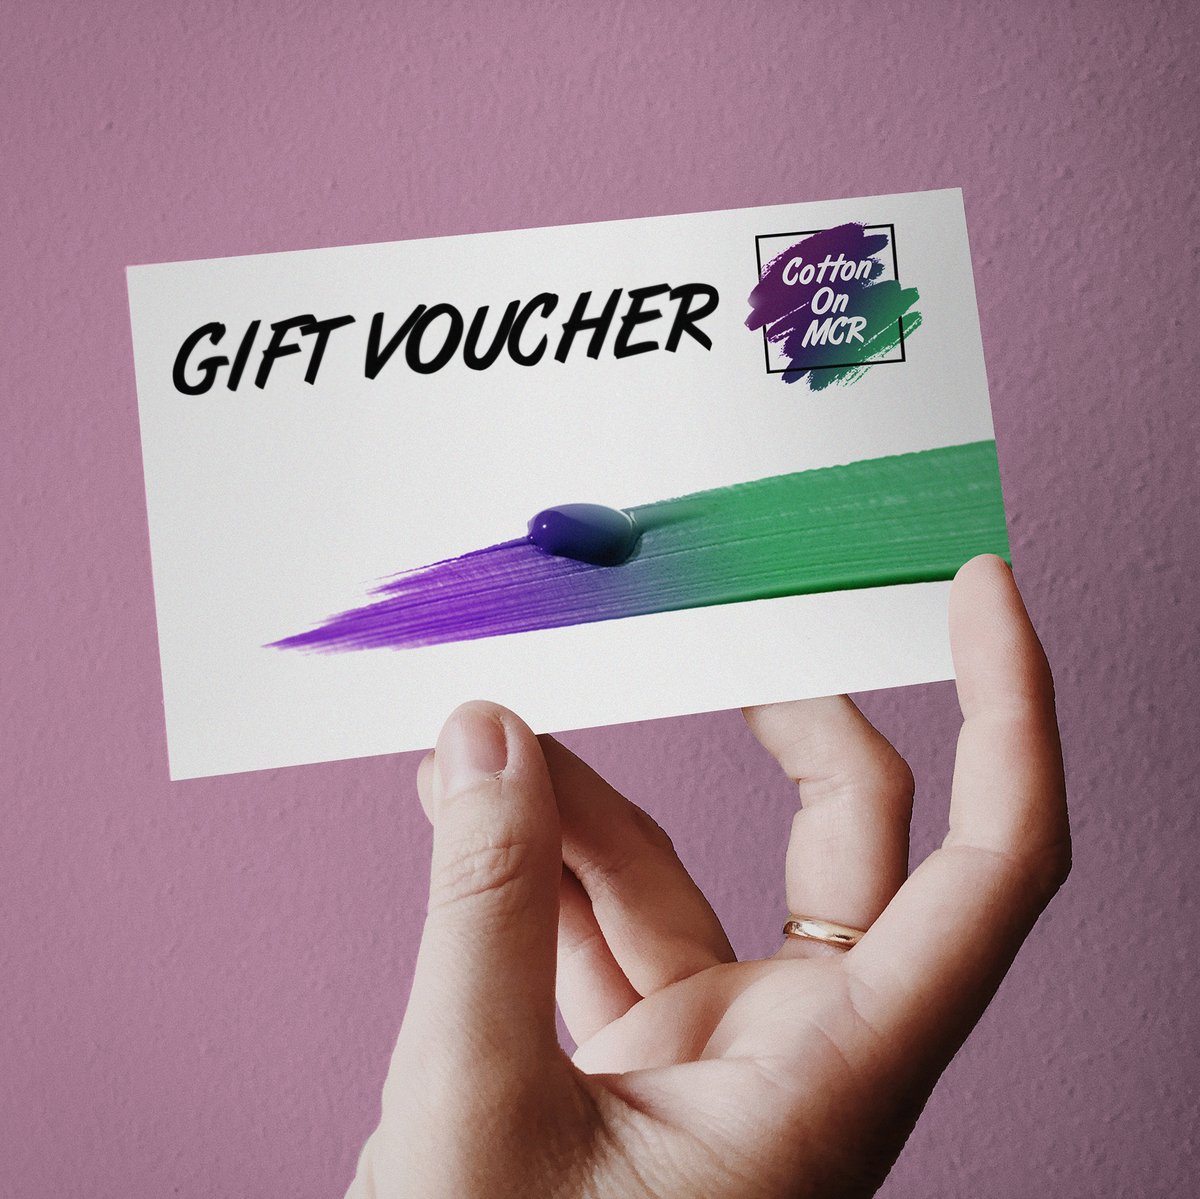 Need a last minuet Mothers Day present? For the arty Mum we have the perfect gift. Why not give her a gift voucher for our workshops! She'll learn something new and get back out there post lockdown Purchase now via the website #cottononmcr#MothersDay2021 bit.ly/3cexvd4